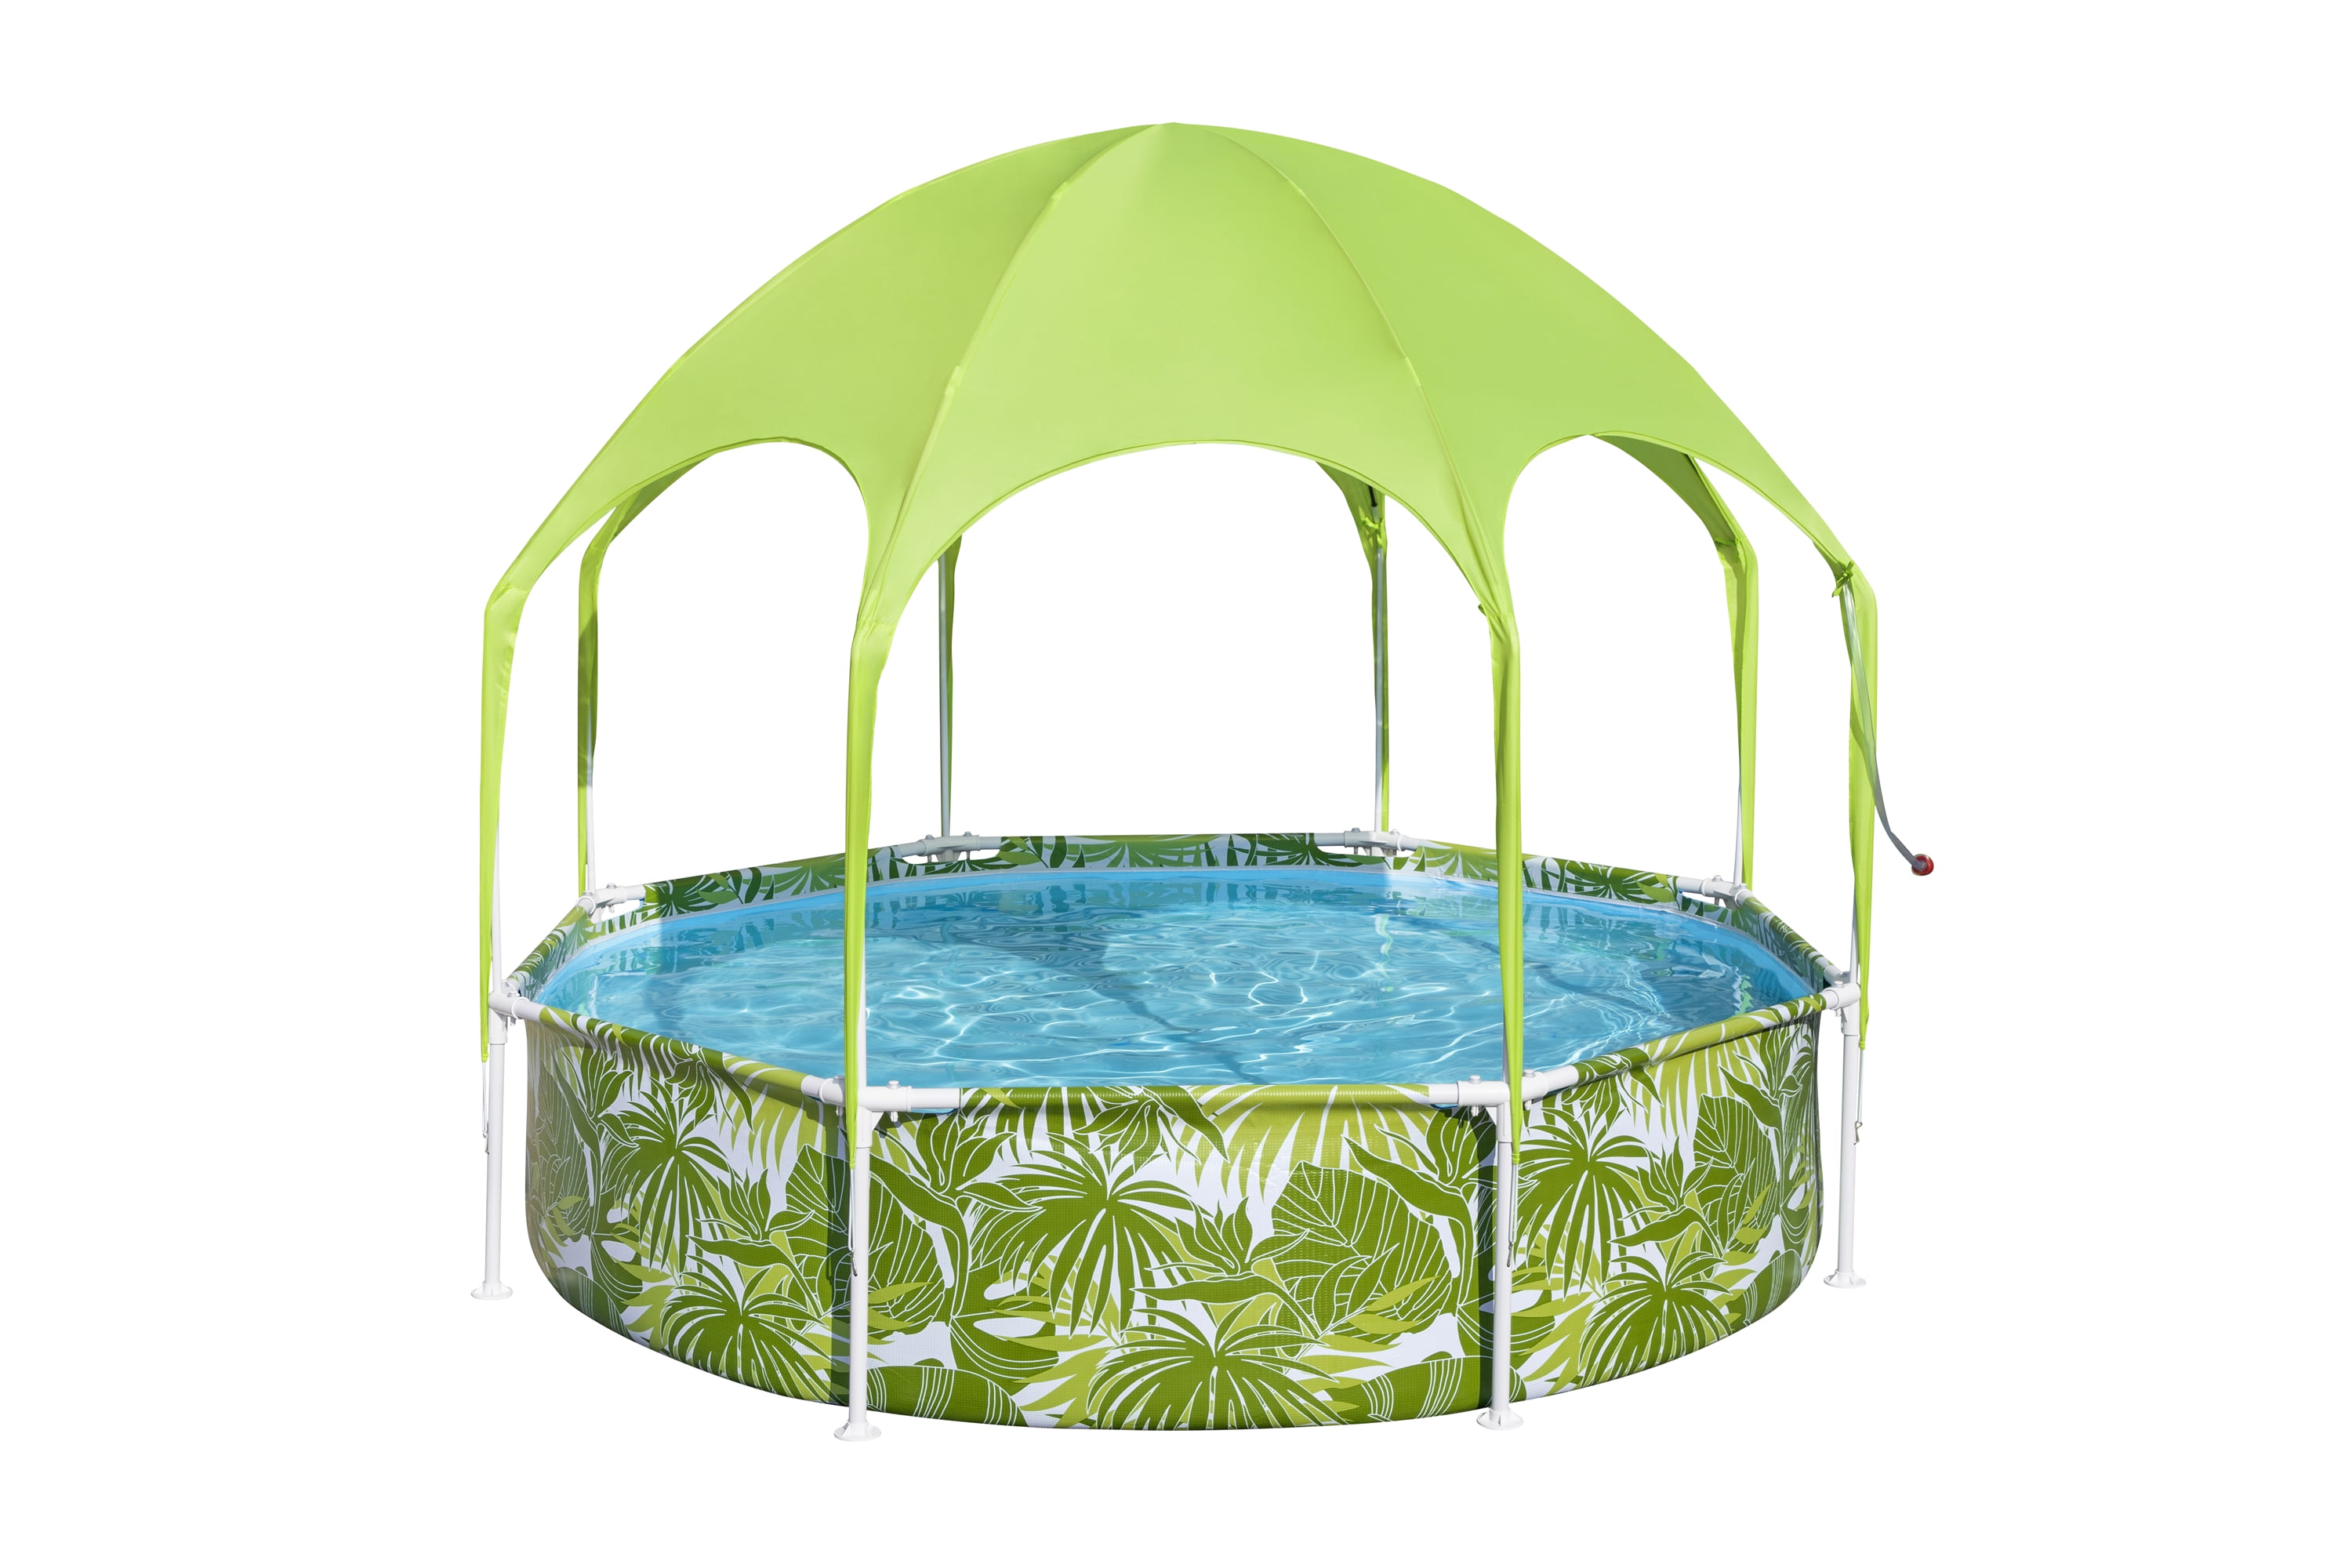 8' x 20" H2OGO Round Above Ground Pool Set W/ Shade & Cooling Mister $98 + Free Shipping